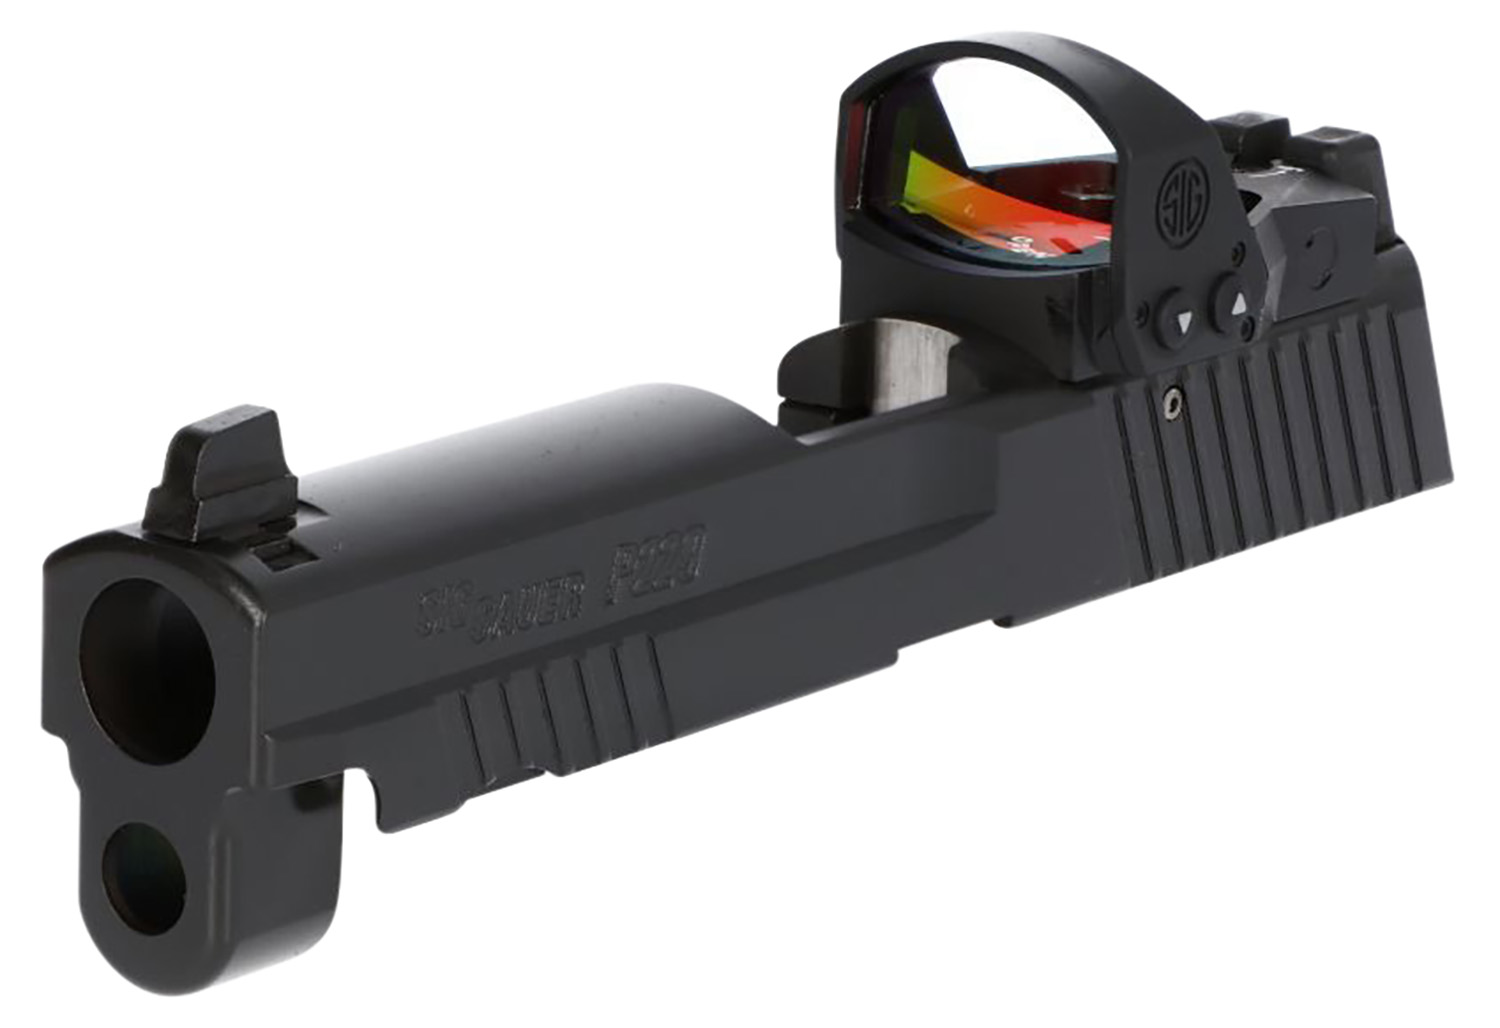 Sig Sauer 8900313 P229 RXP Slide Assembly with Optics Cut, Black Nitride, Suppressor Height Contrast Sights, Romeo1 Pro Red Dot Included for Sig P229